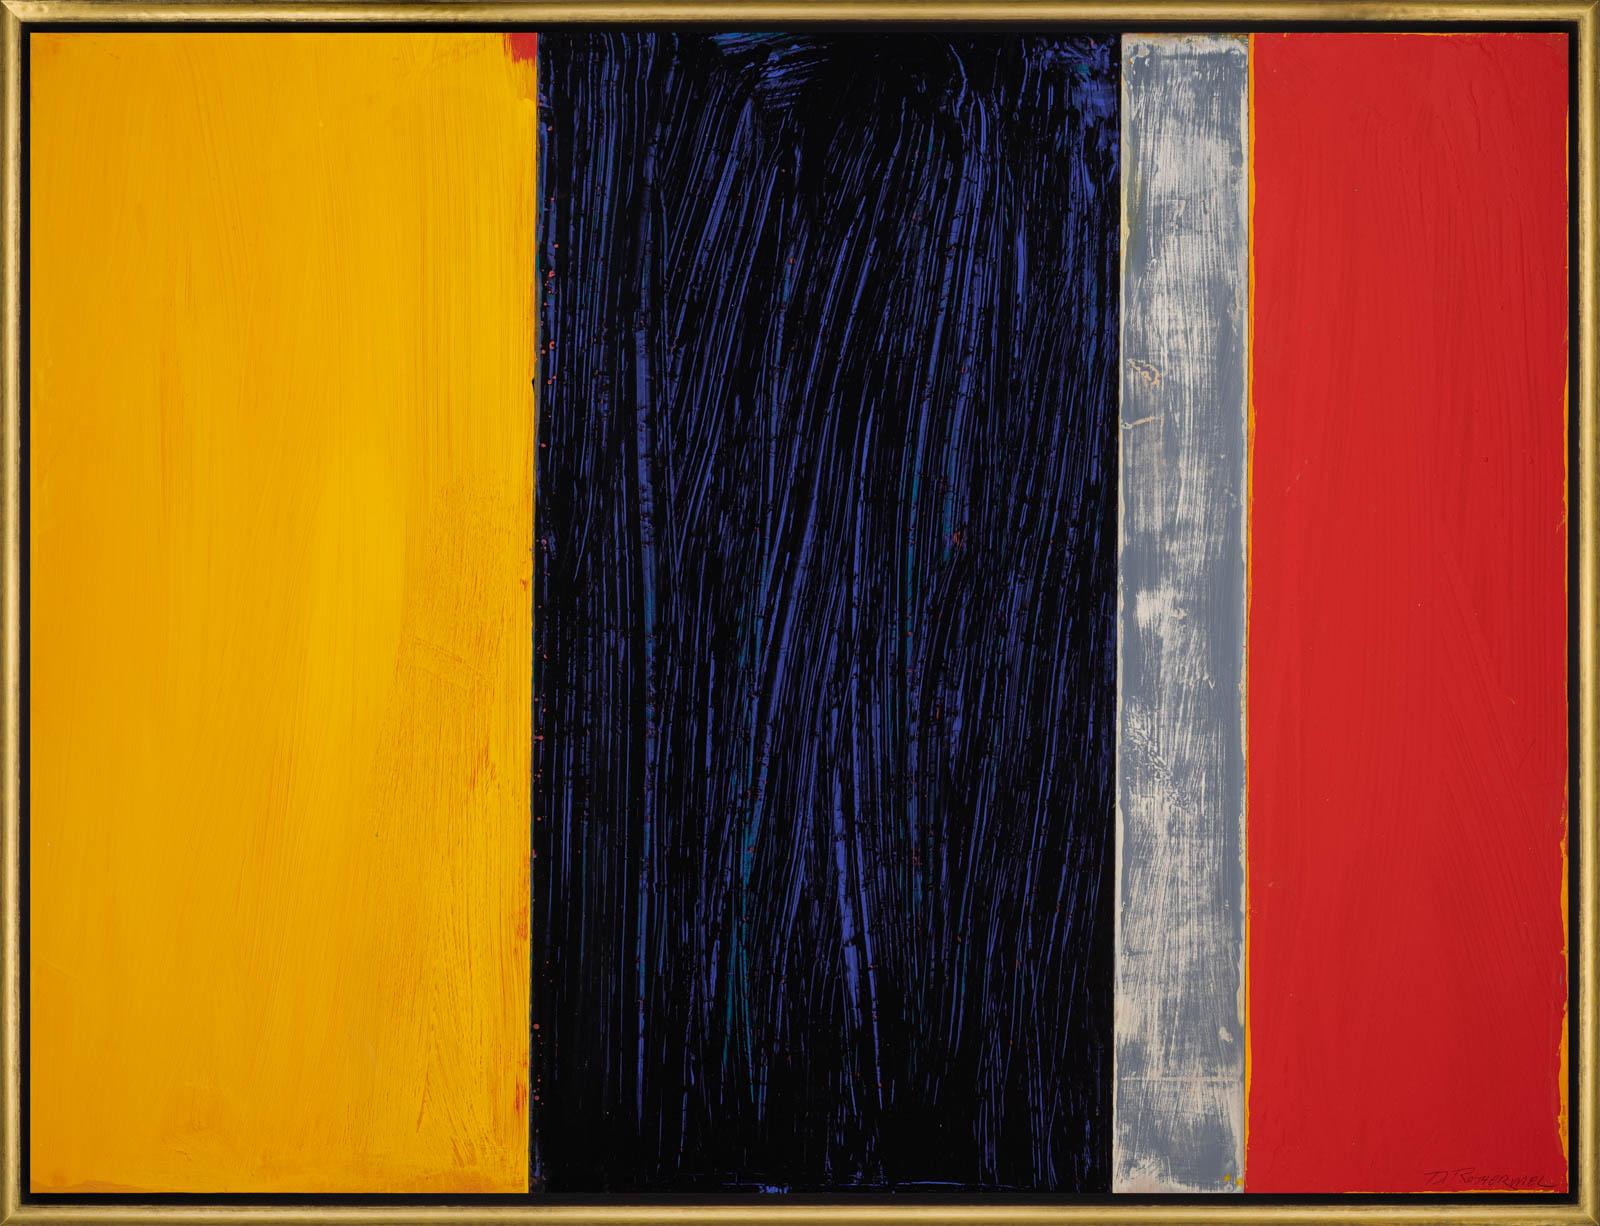 David Rothermel Abstract Painting - "Vitruvius" Yellow, Black, Red, and Gray Color Blocking on Panel